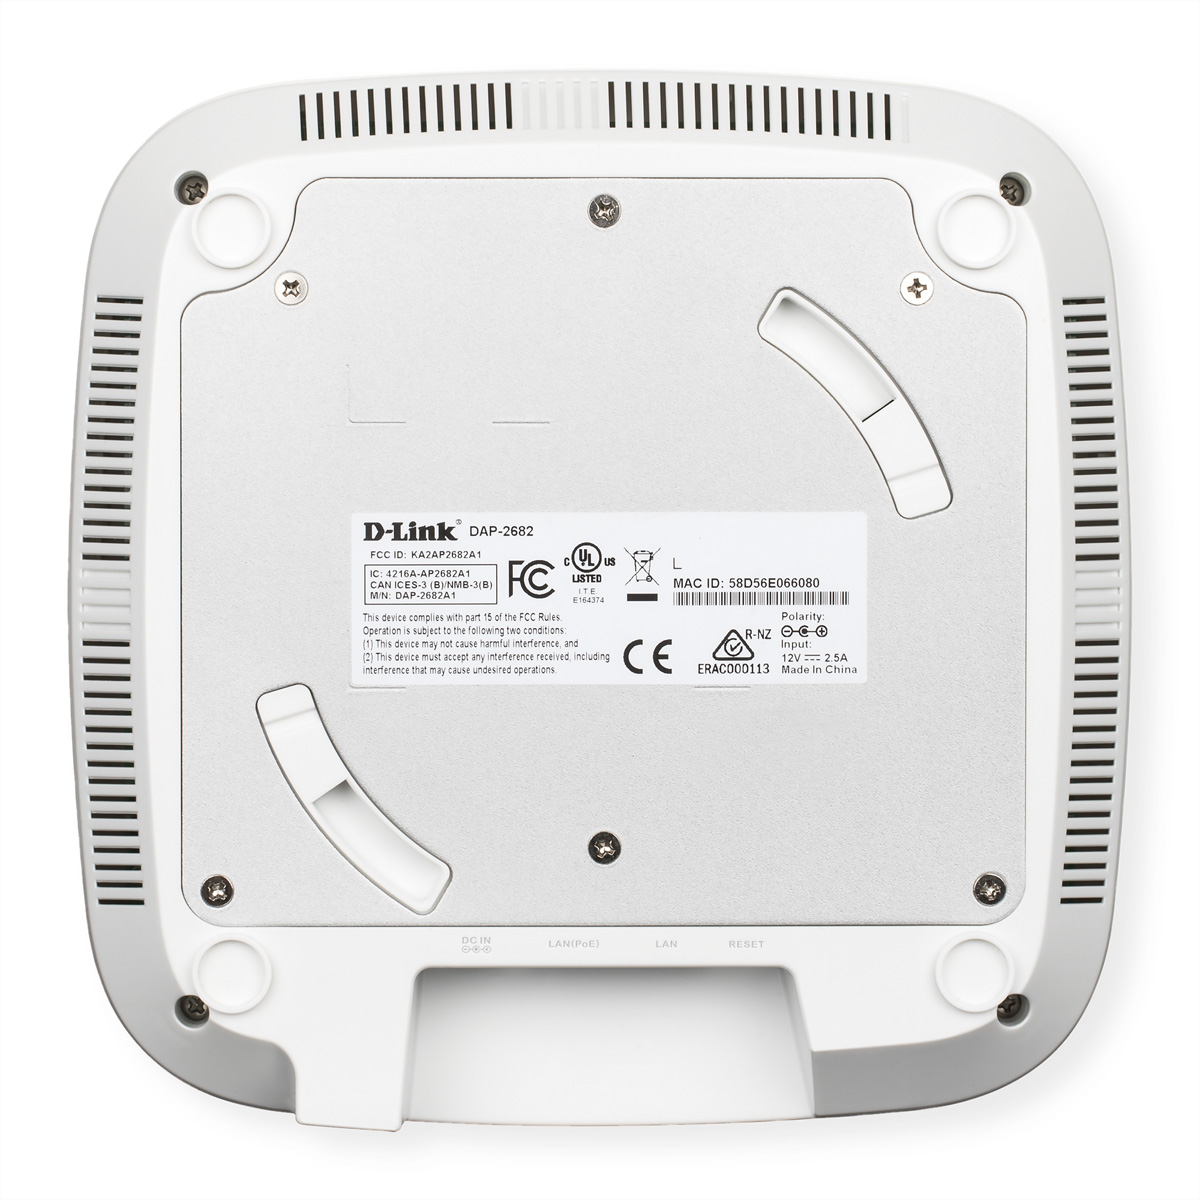 2 Access Access Gbit/s Dual-Band Point D-LINK 2,3 DAP-2682 AC2300 Wireless PoE Points Wave